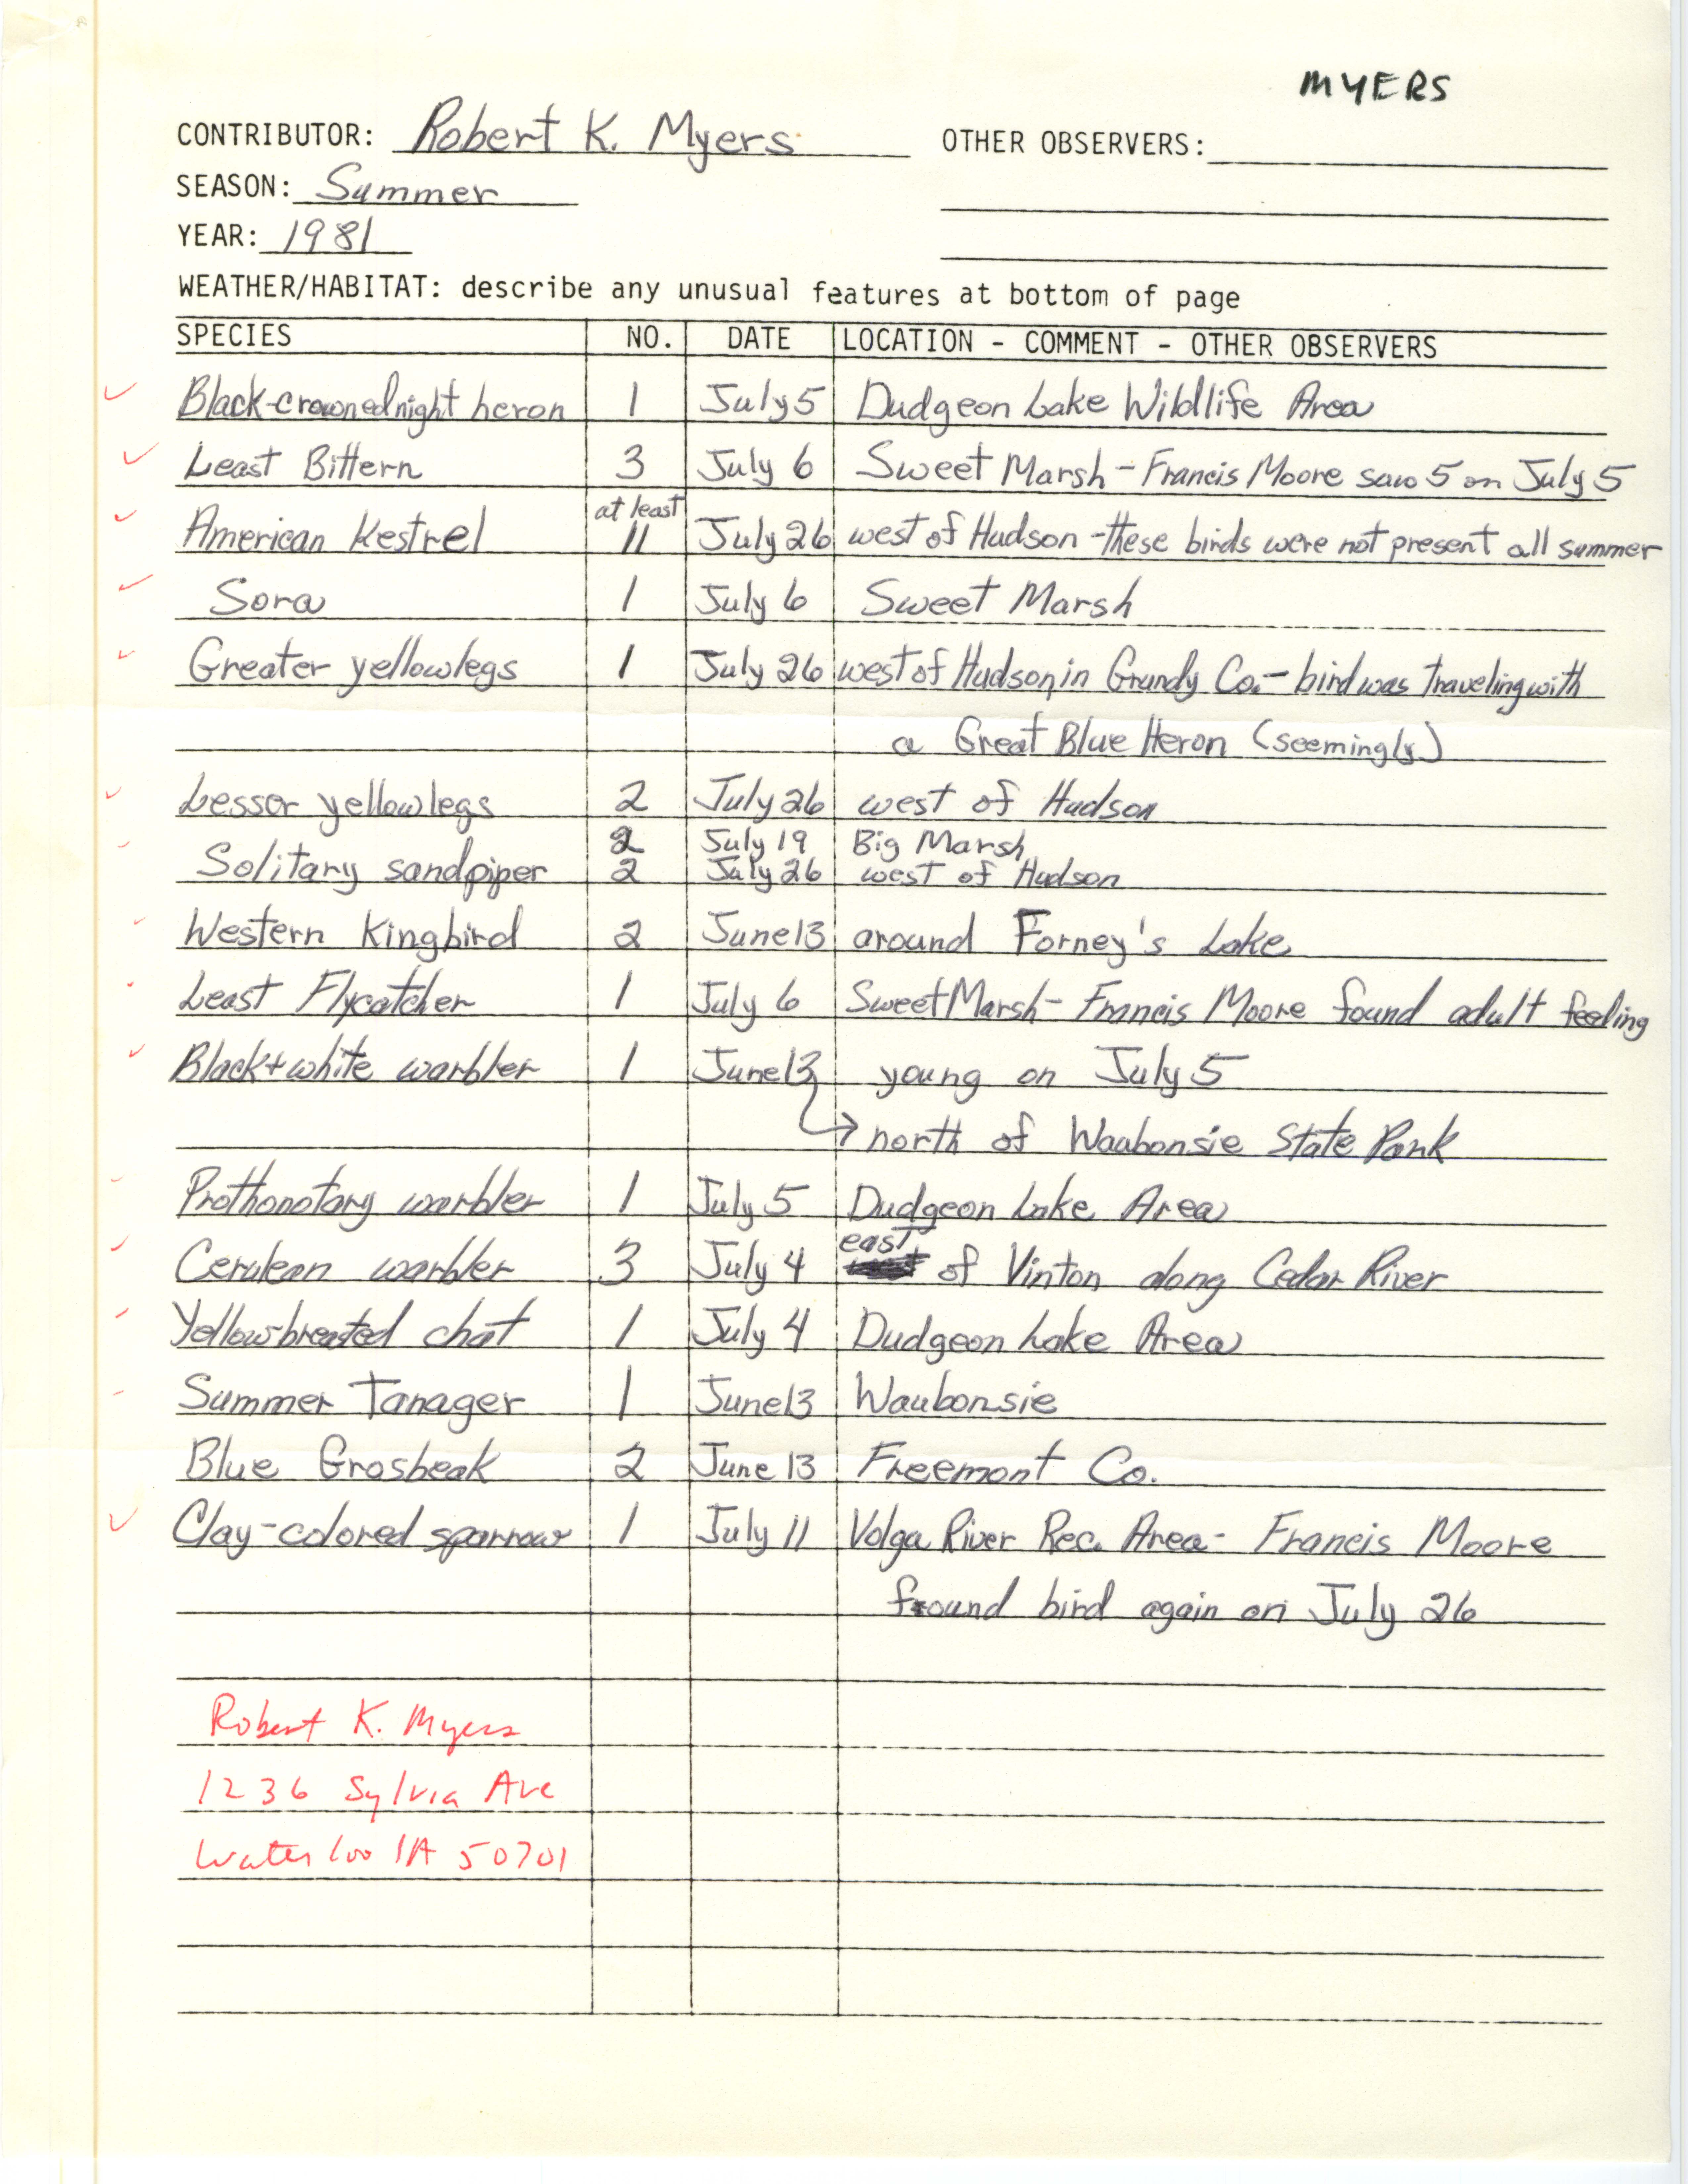 Field notes contributed by Robert K. Myers with verifying documentation, summer 1981